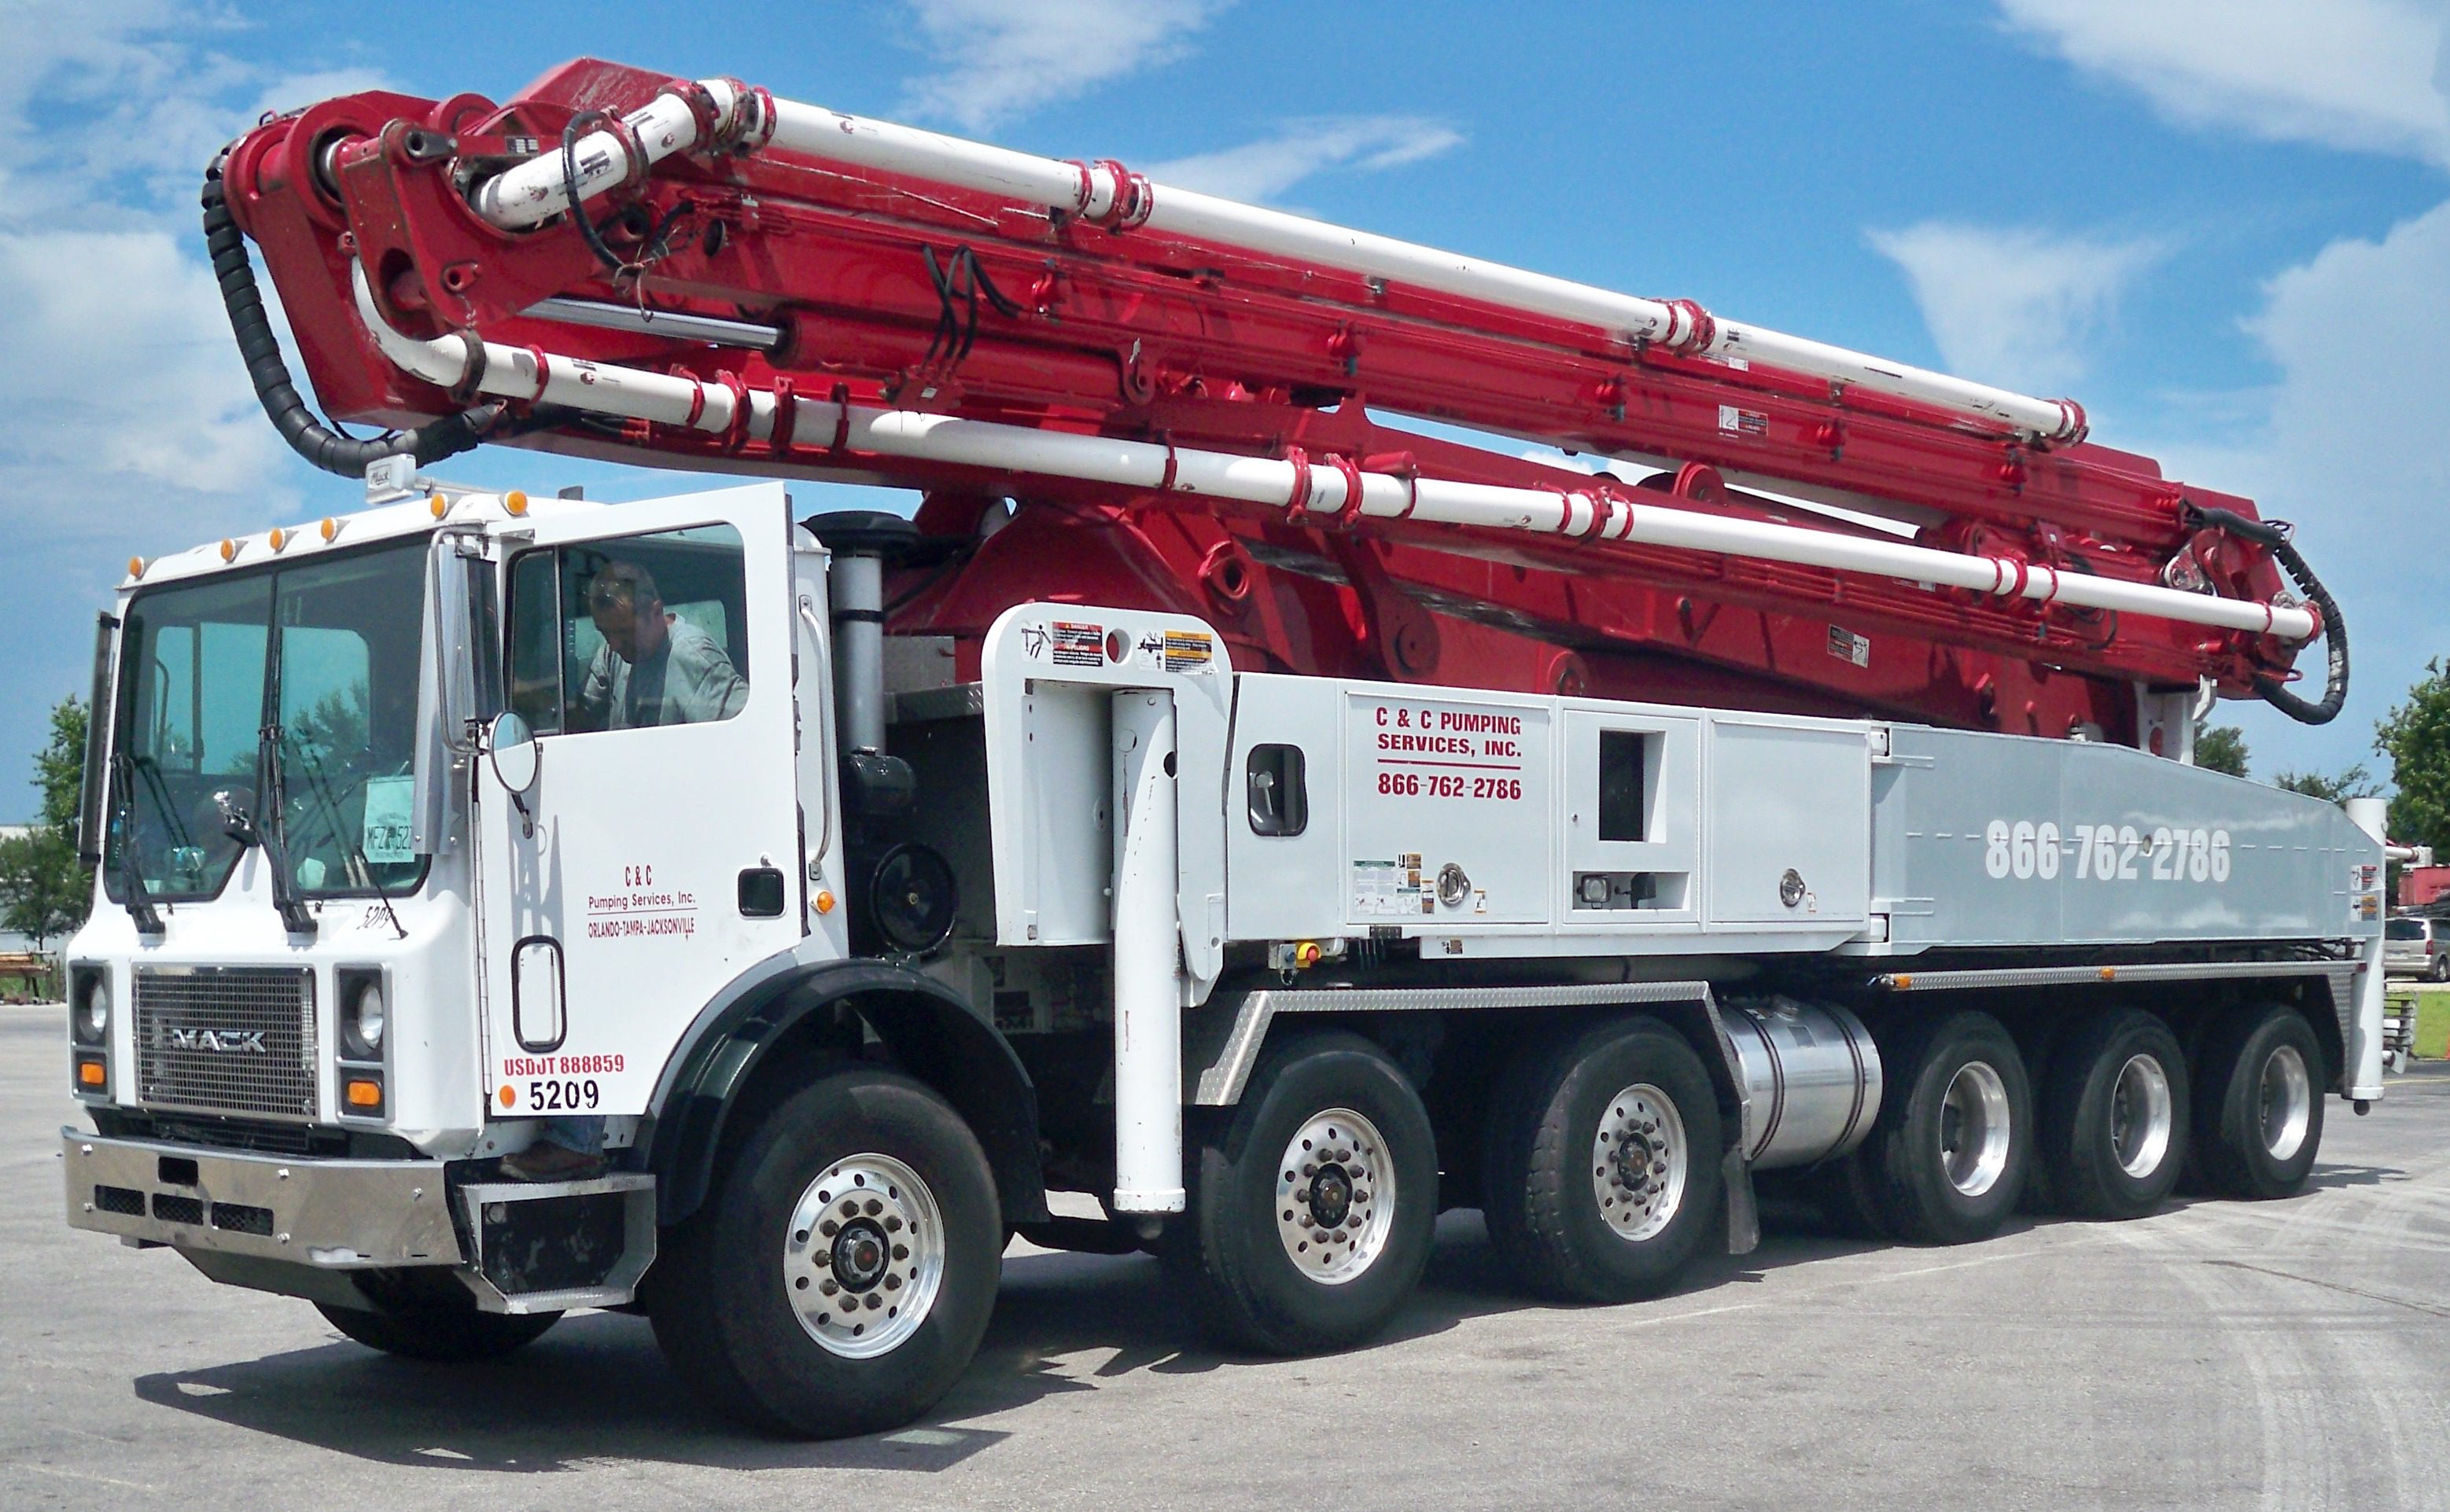 52 Meter concrete boom pump, provided by C&C Pumping Services Inc. 